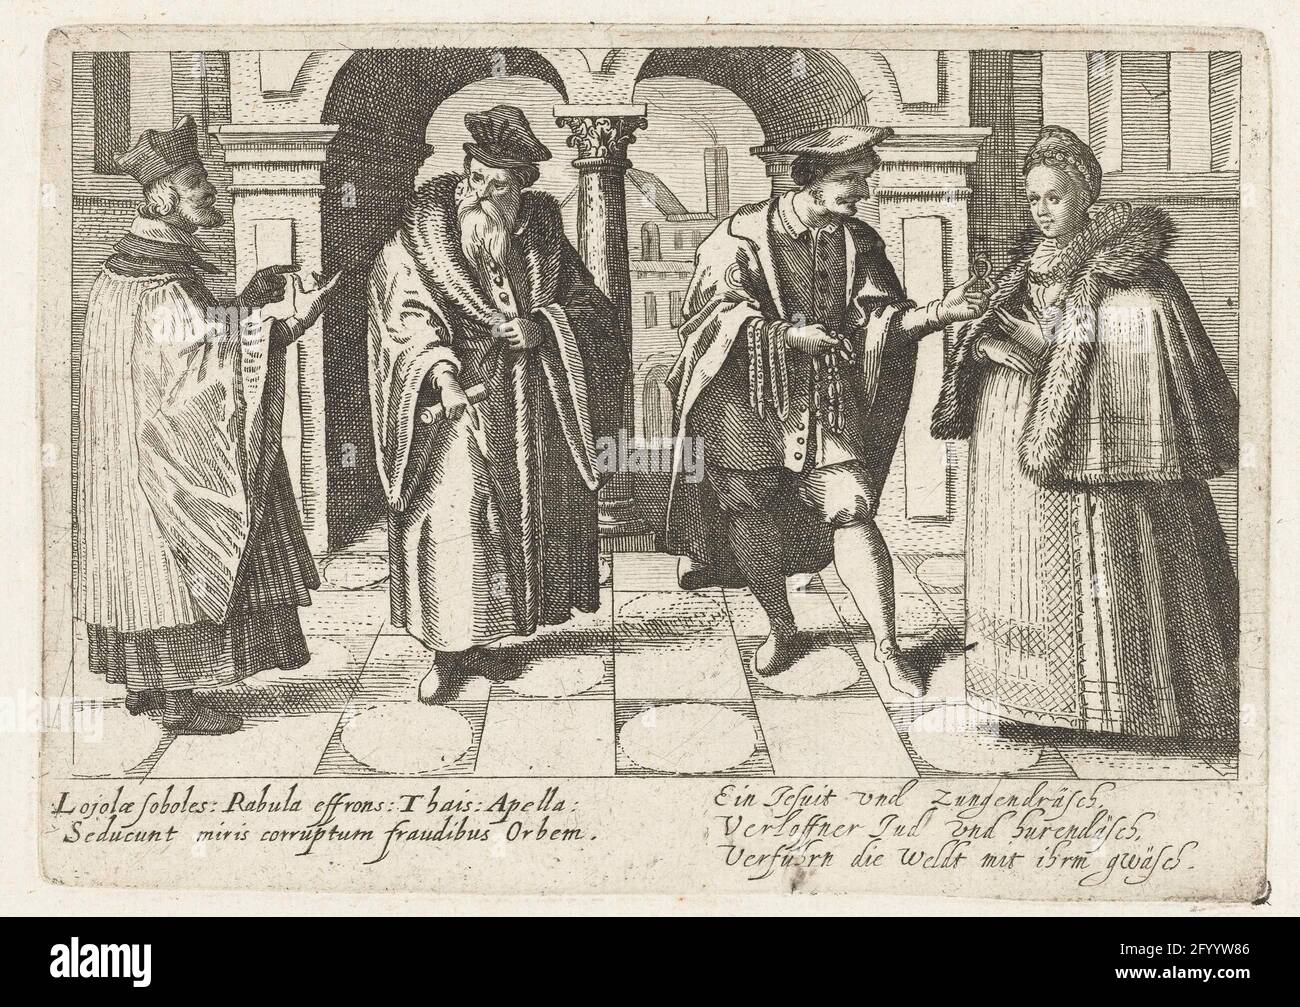 A priest, Jezuite and Jewish merchant at a lady: Ein Jesuit und Zungendräsch ...; Pugillus Facetarium Iconographicarum ... Strasbourg 1608. From left to right: A priest who makes a speech, a Jesuit in fur coat and a Jew that tries to sell the lady next to him and other jewelry. In the margin 2 lines Latin: Lojolae Soboles..fraudibus Orbem 'and 3 lines German: Ein Jesuit und Zungendräsch / Raidsner Jud und Burendäsch / Verfhrn that does mit ihrm wäsch. (Not numbered). Print from: Pugillis facetarium .... Strasburg. Stock Photo